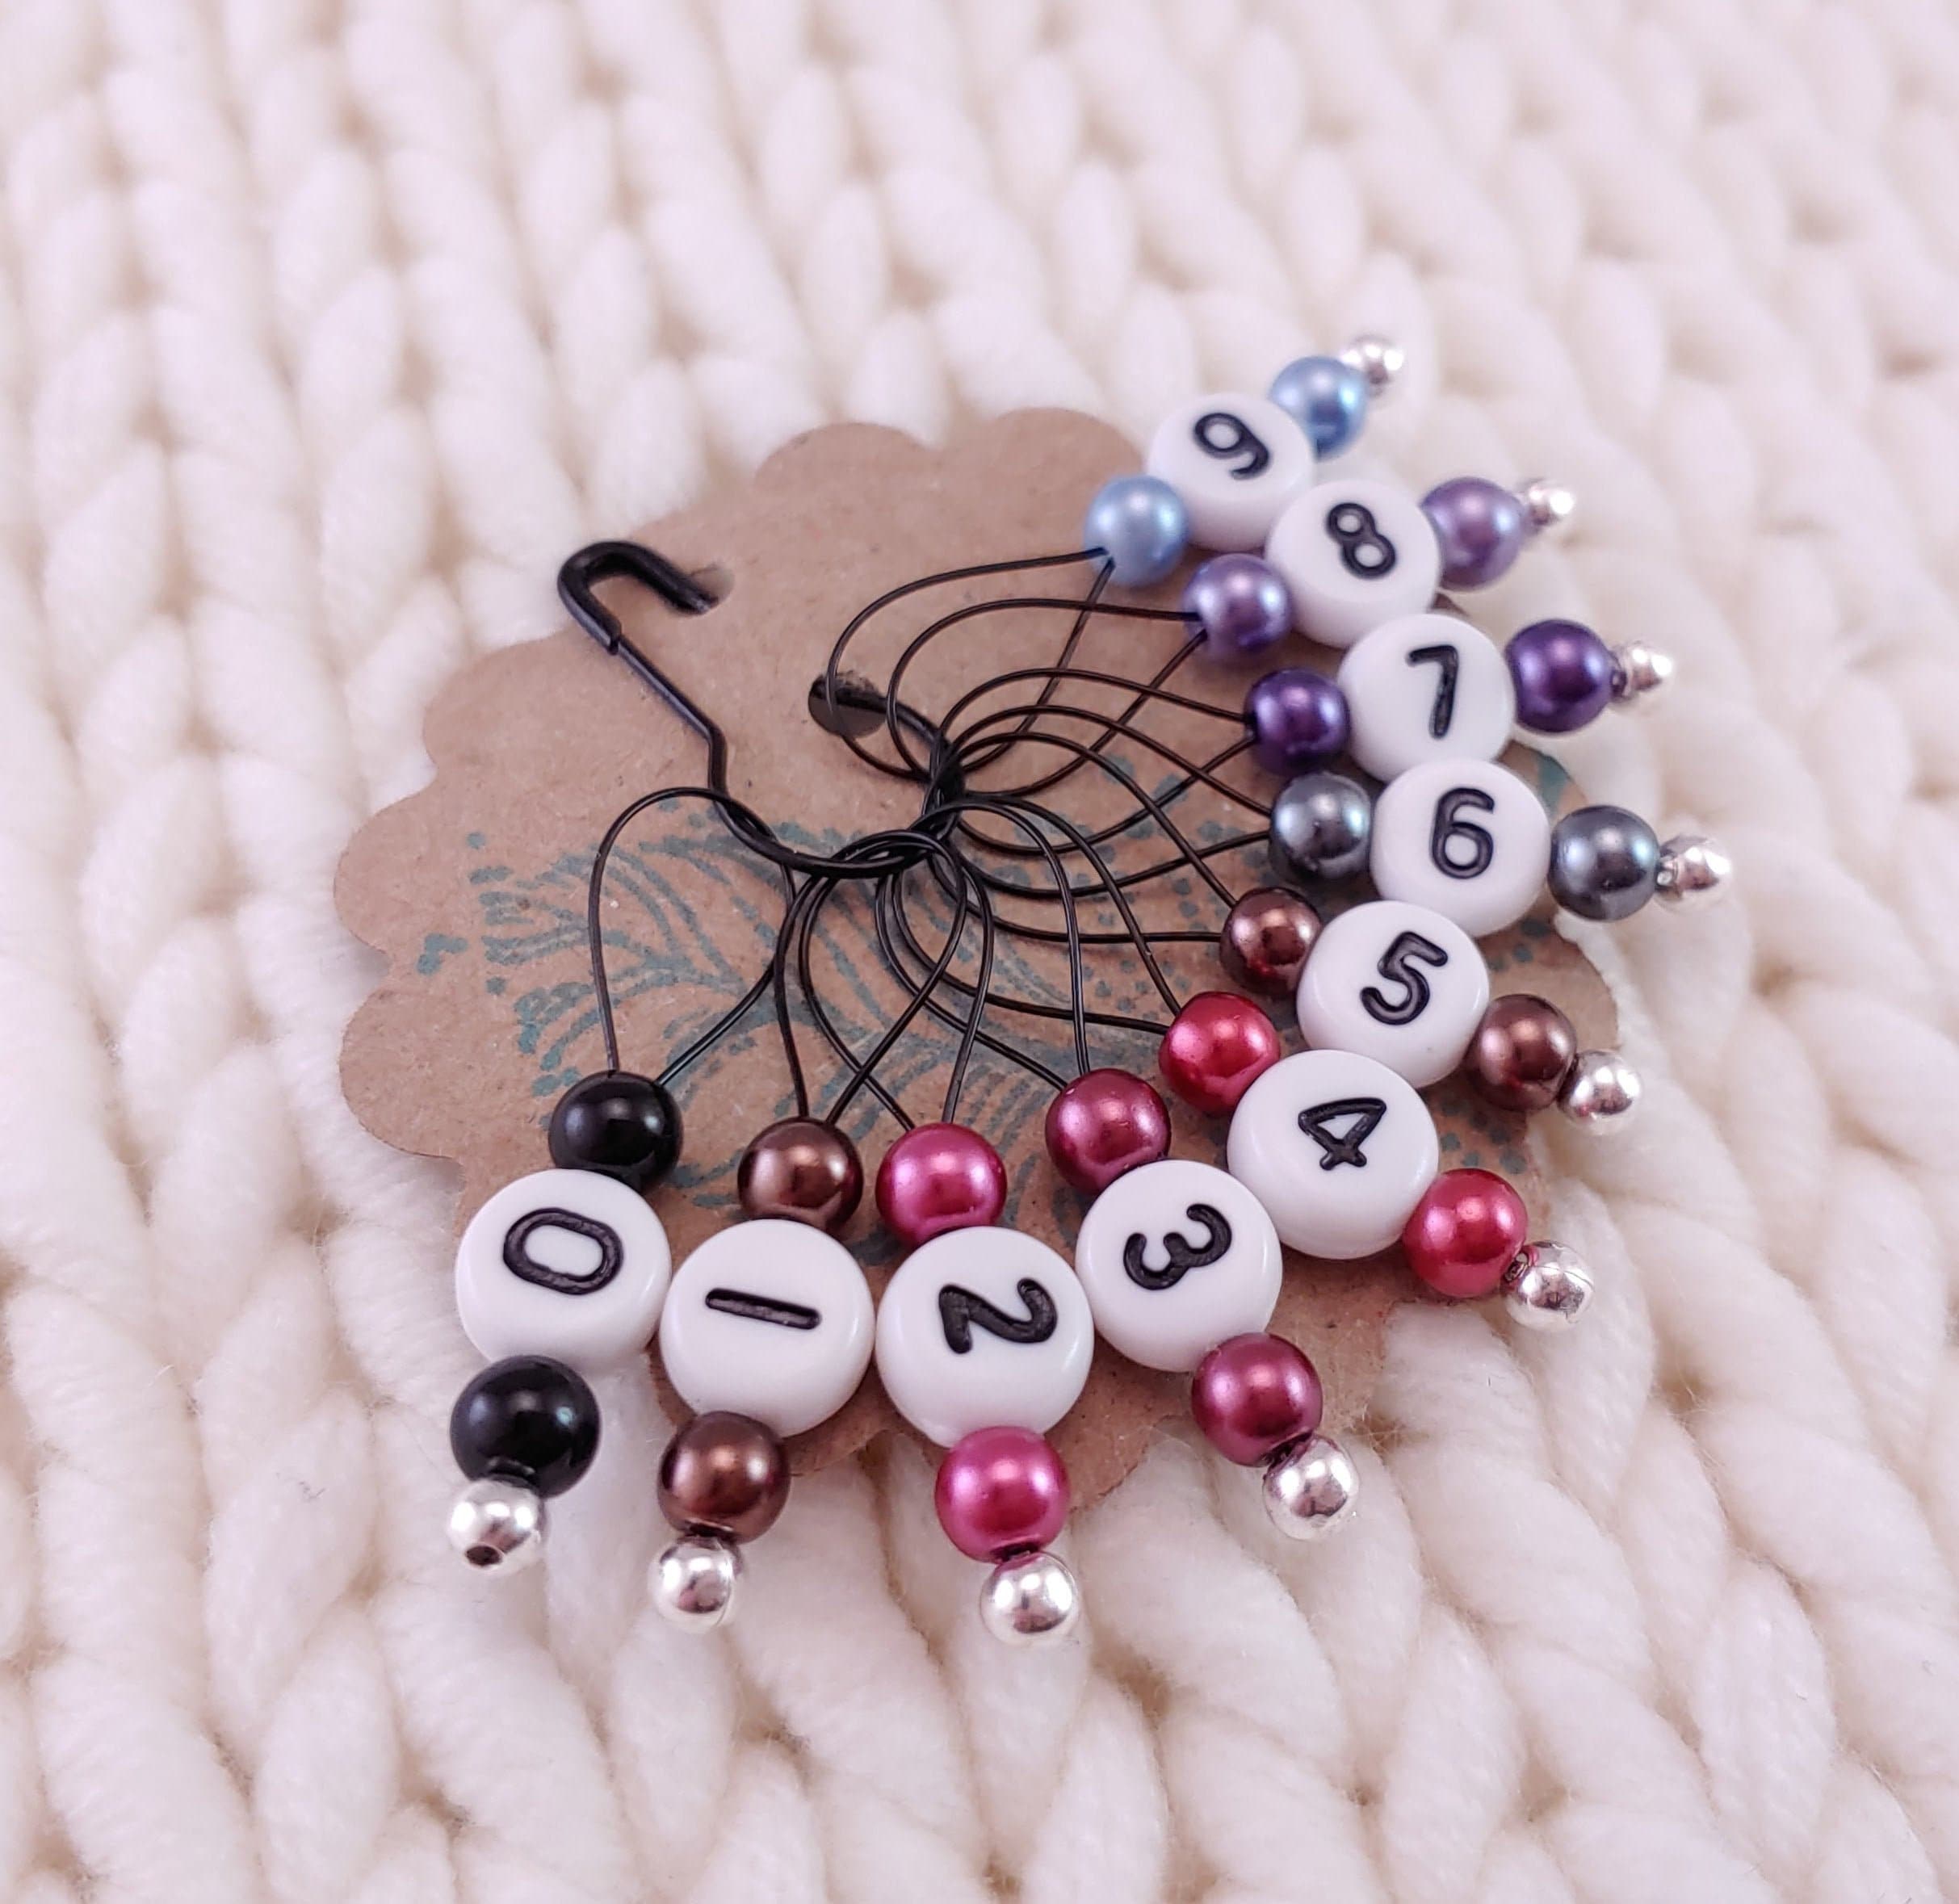 Number Stitch Marker for Knitting and Crochet, 0-9 Enamel Charms  Multi-colors Row Counter, Crochet Hook Marker, Crochet Stitch Marker 